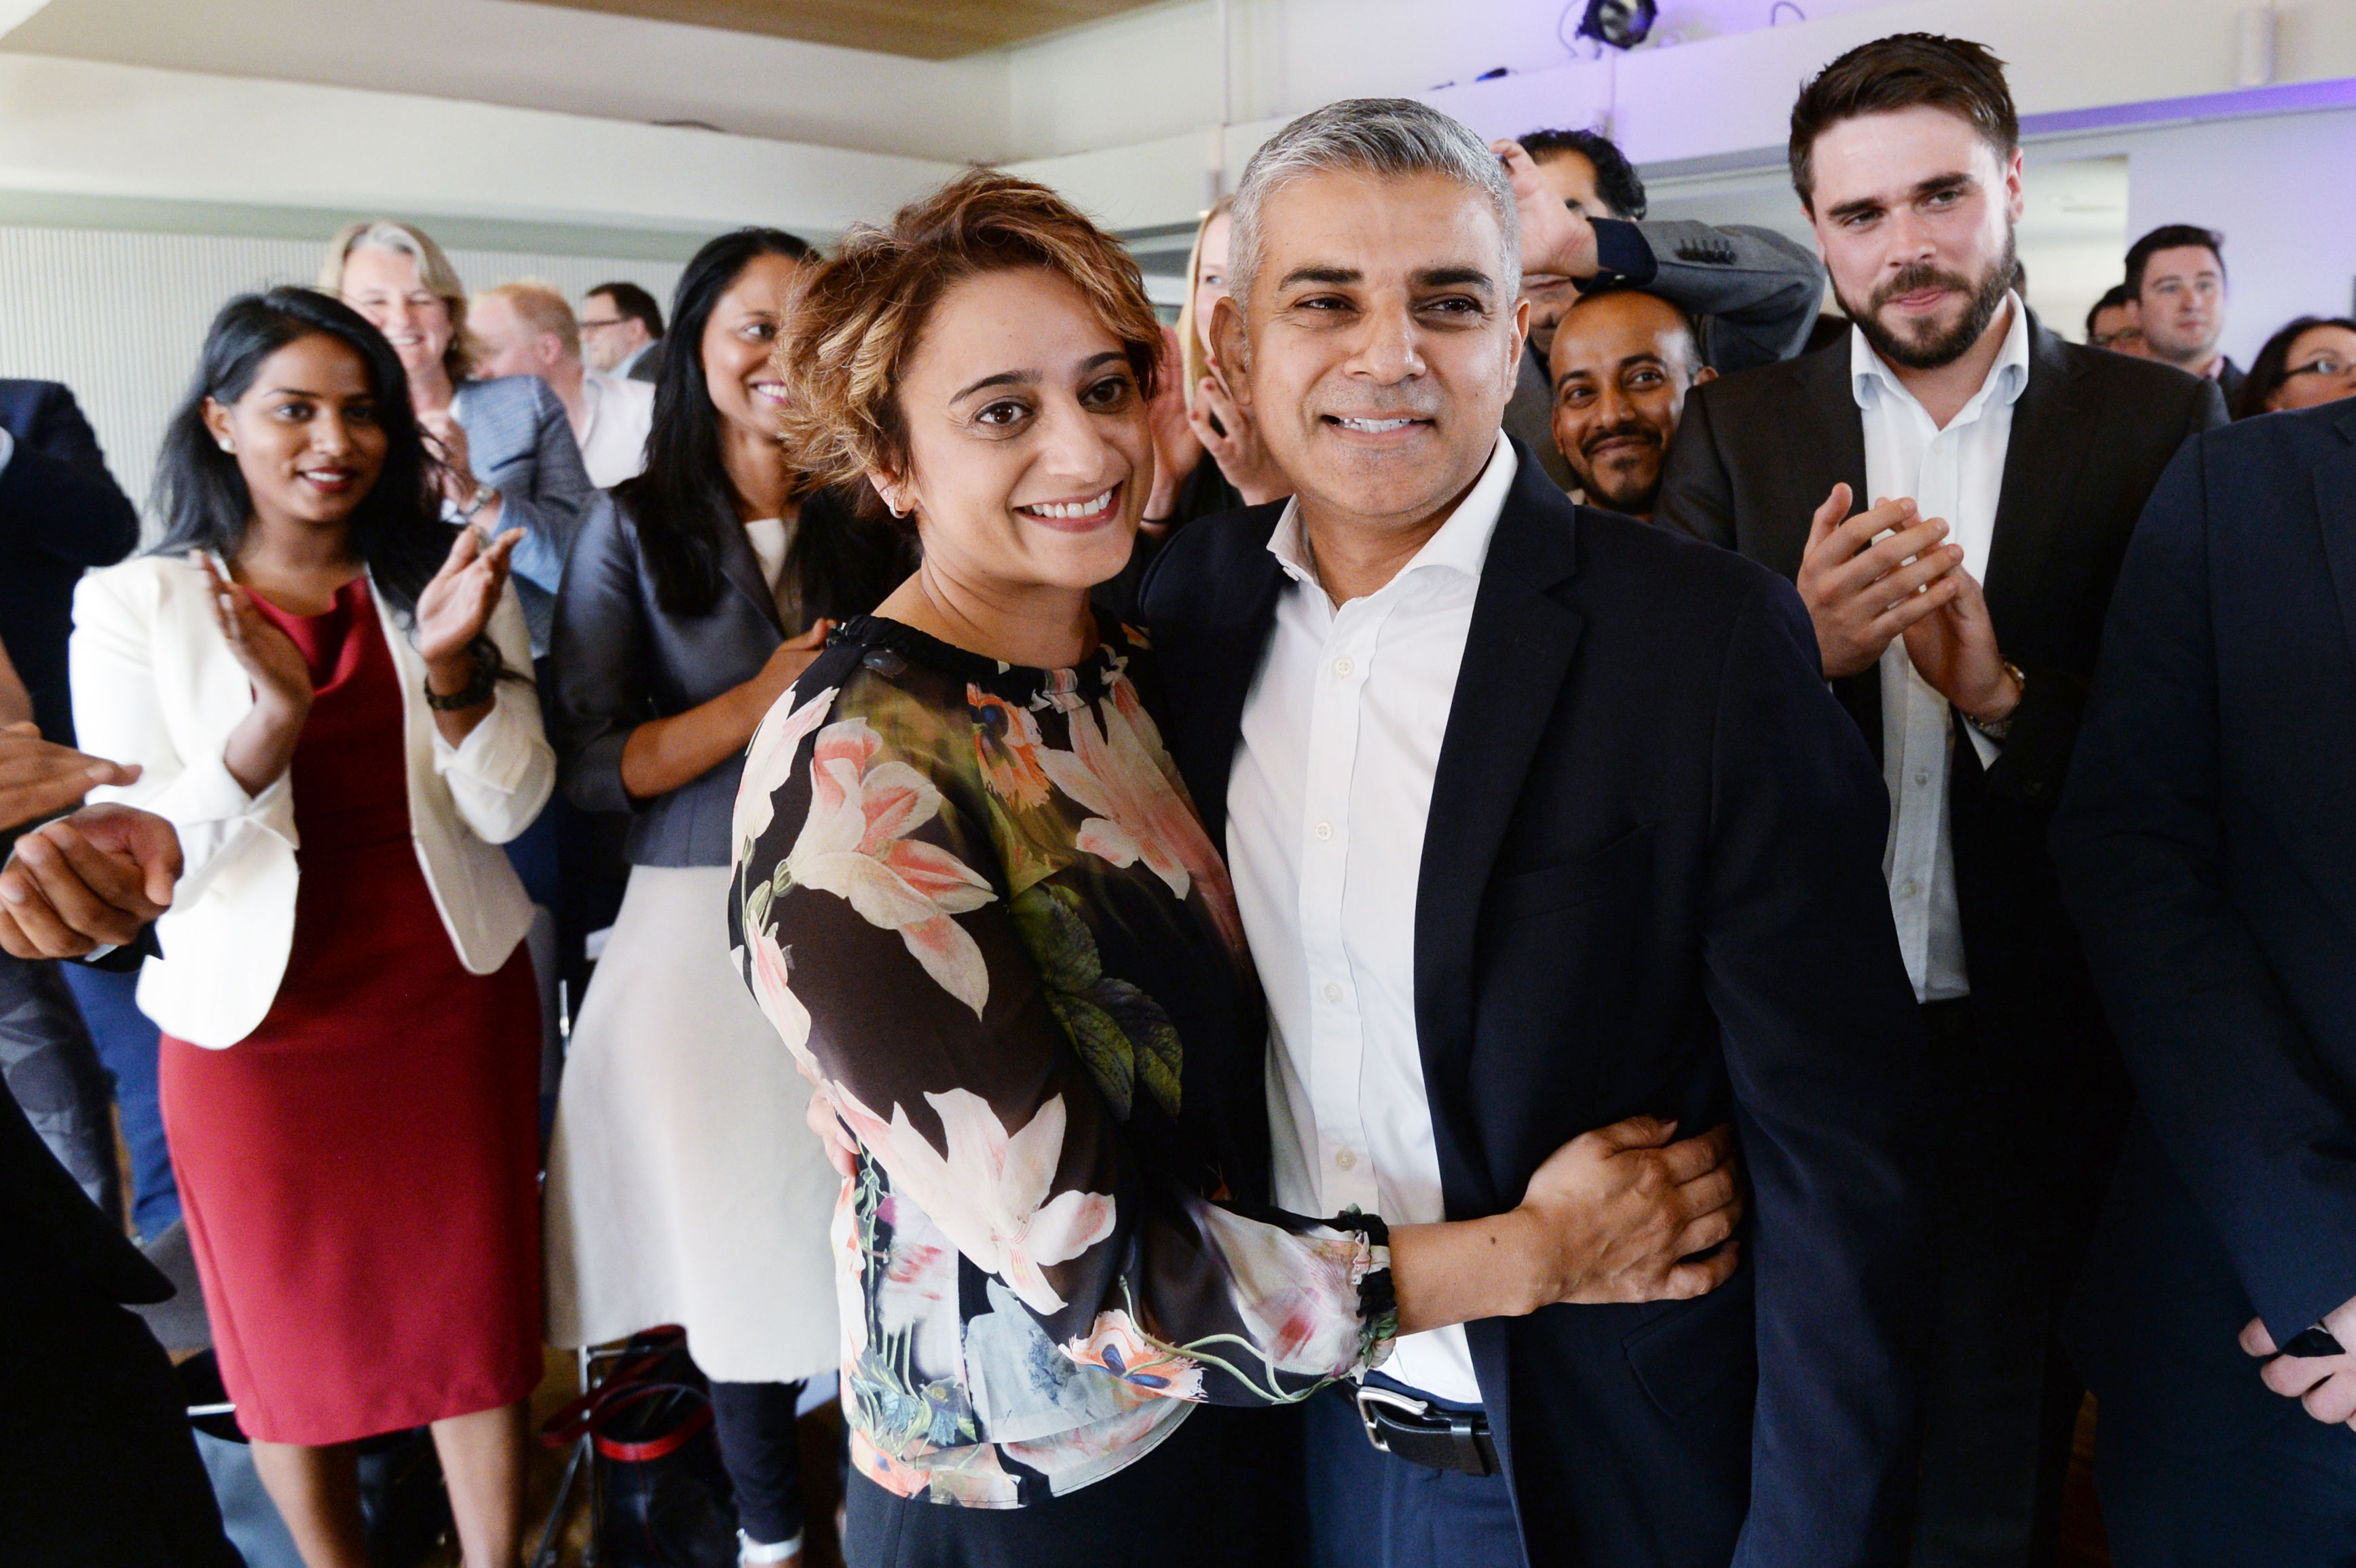 Sadiq Khan MP is congratulated by his wife Saadiya after it was announced that he has been chosen as the Labour candidate to run for London mayor in 2016. (file photo) (Stefan Rousseau—PA Wire/PA Images)